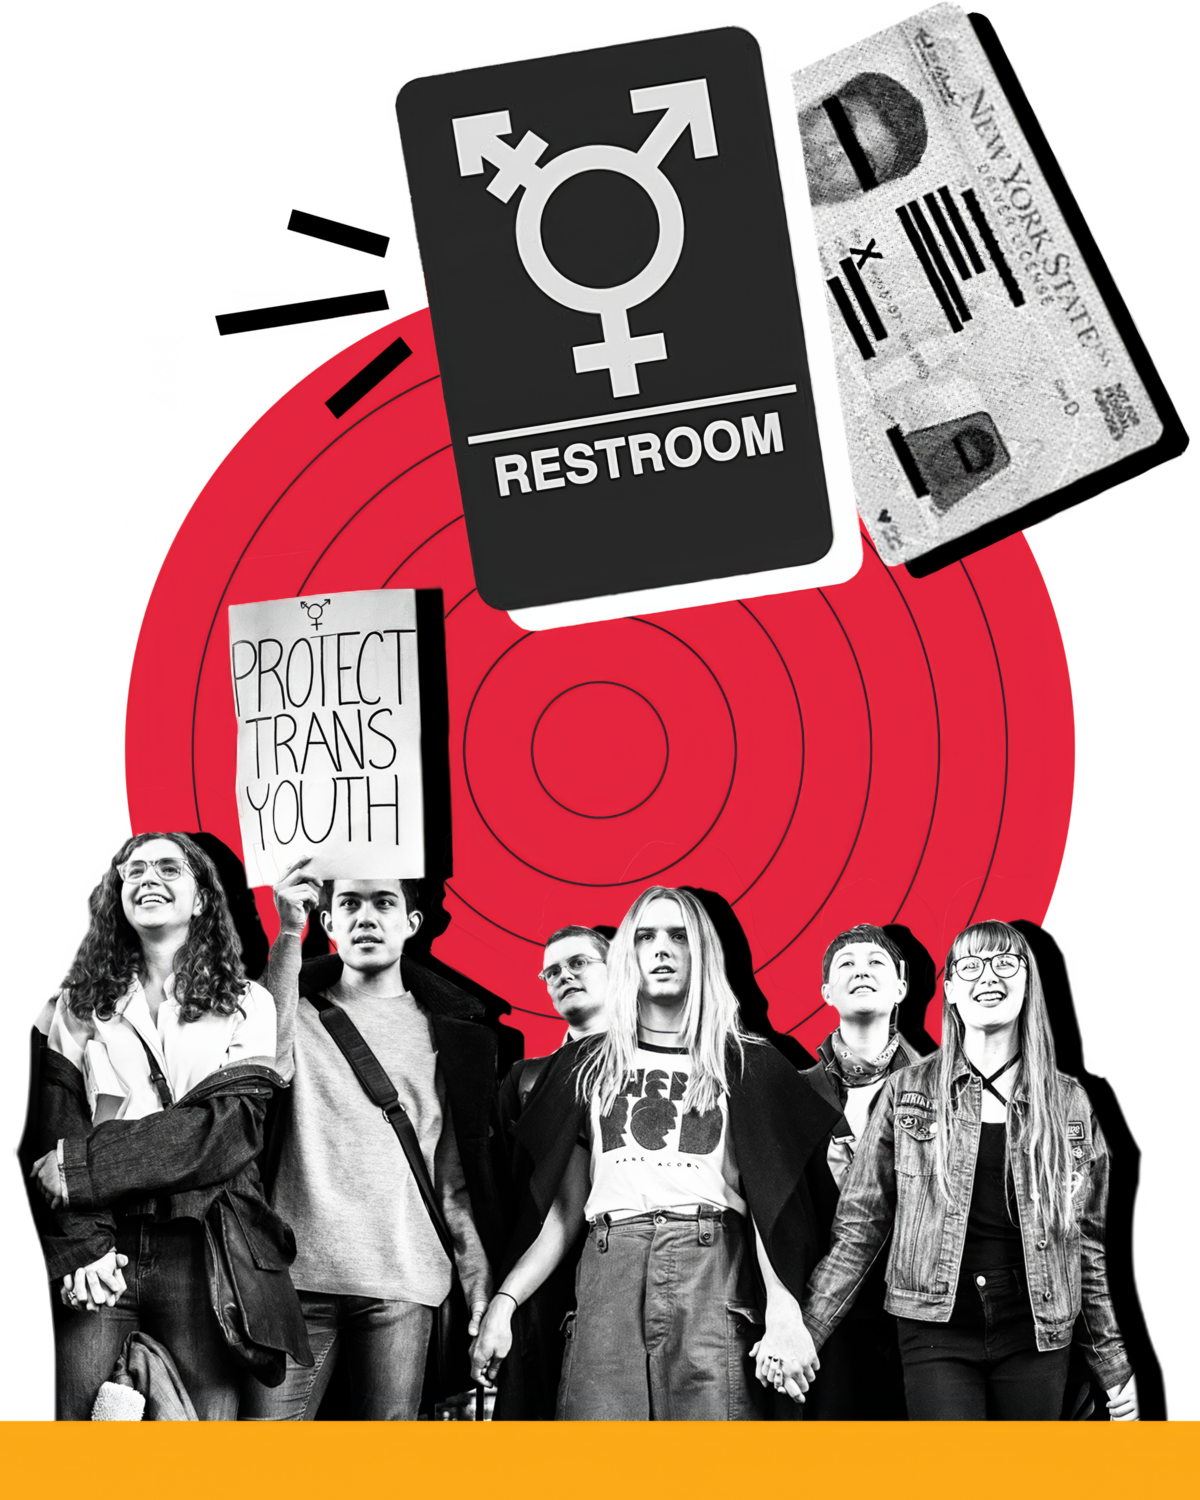 LGBTQ+ Rights Collage. Elements include: Sign for gender neutral bathroom, drivers license with Gender X marker, and students holding hands at a protest.